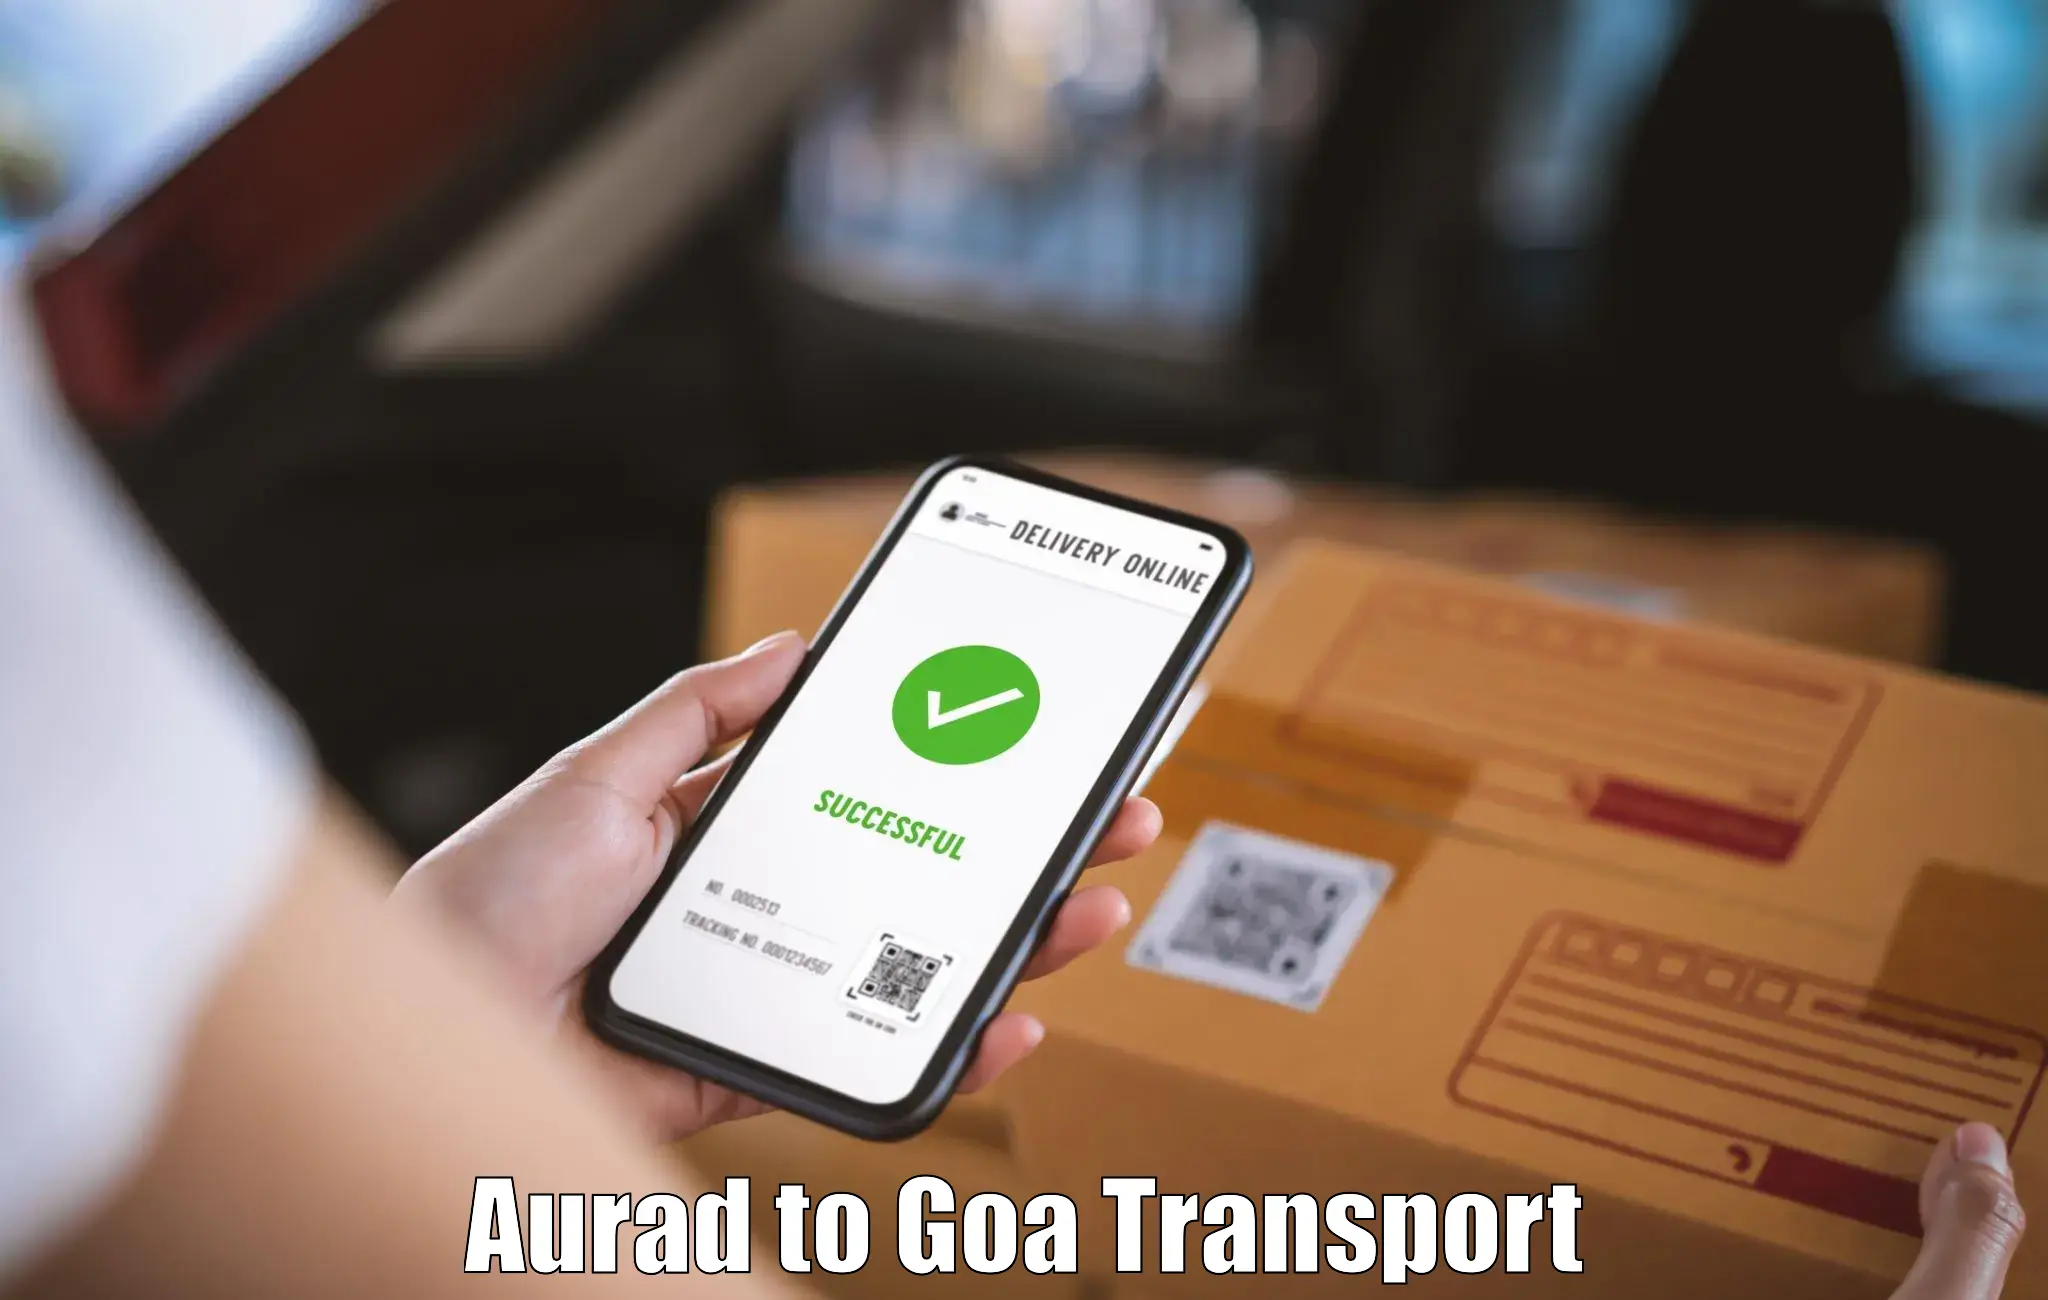 Daily transport service in Aurad to Margao